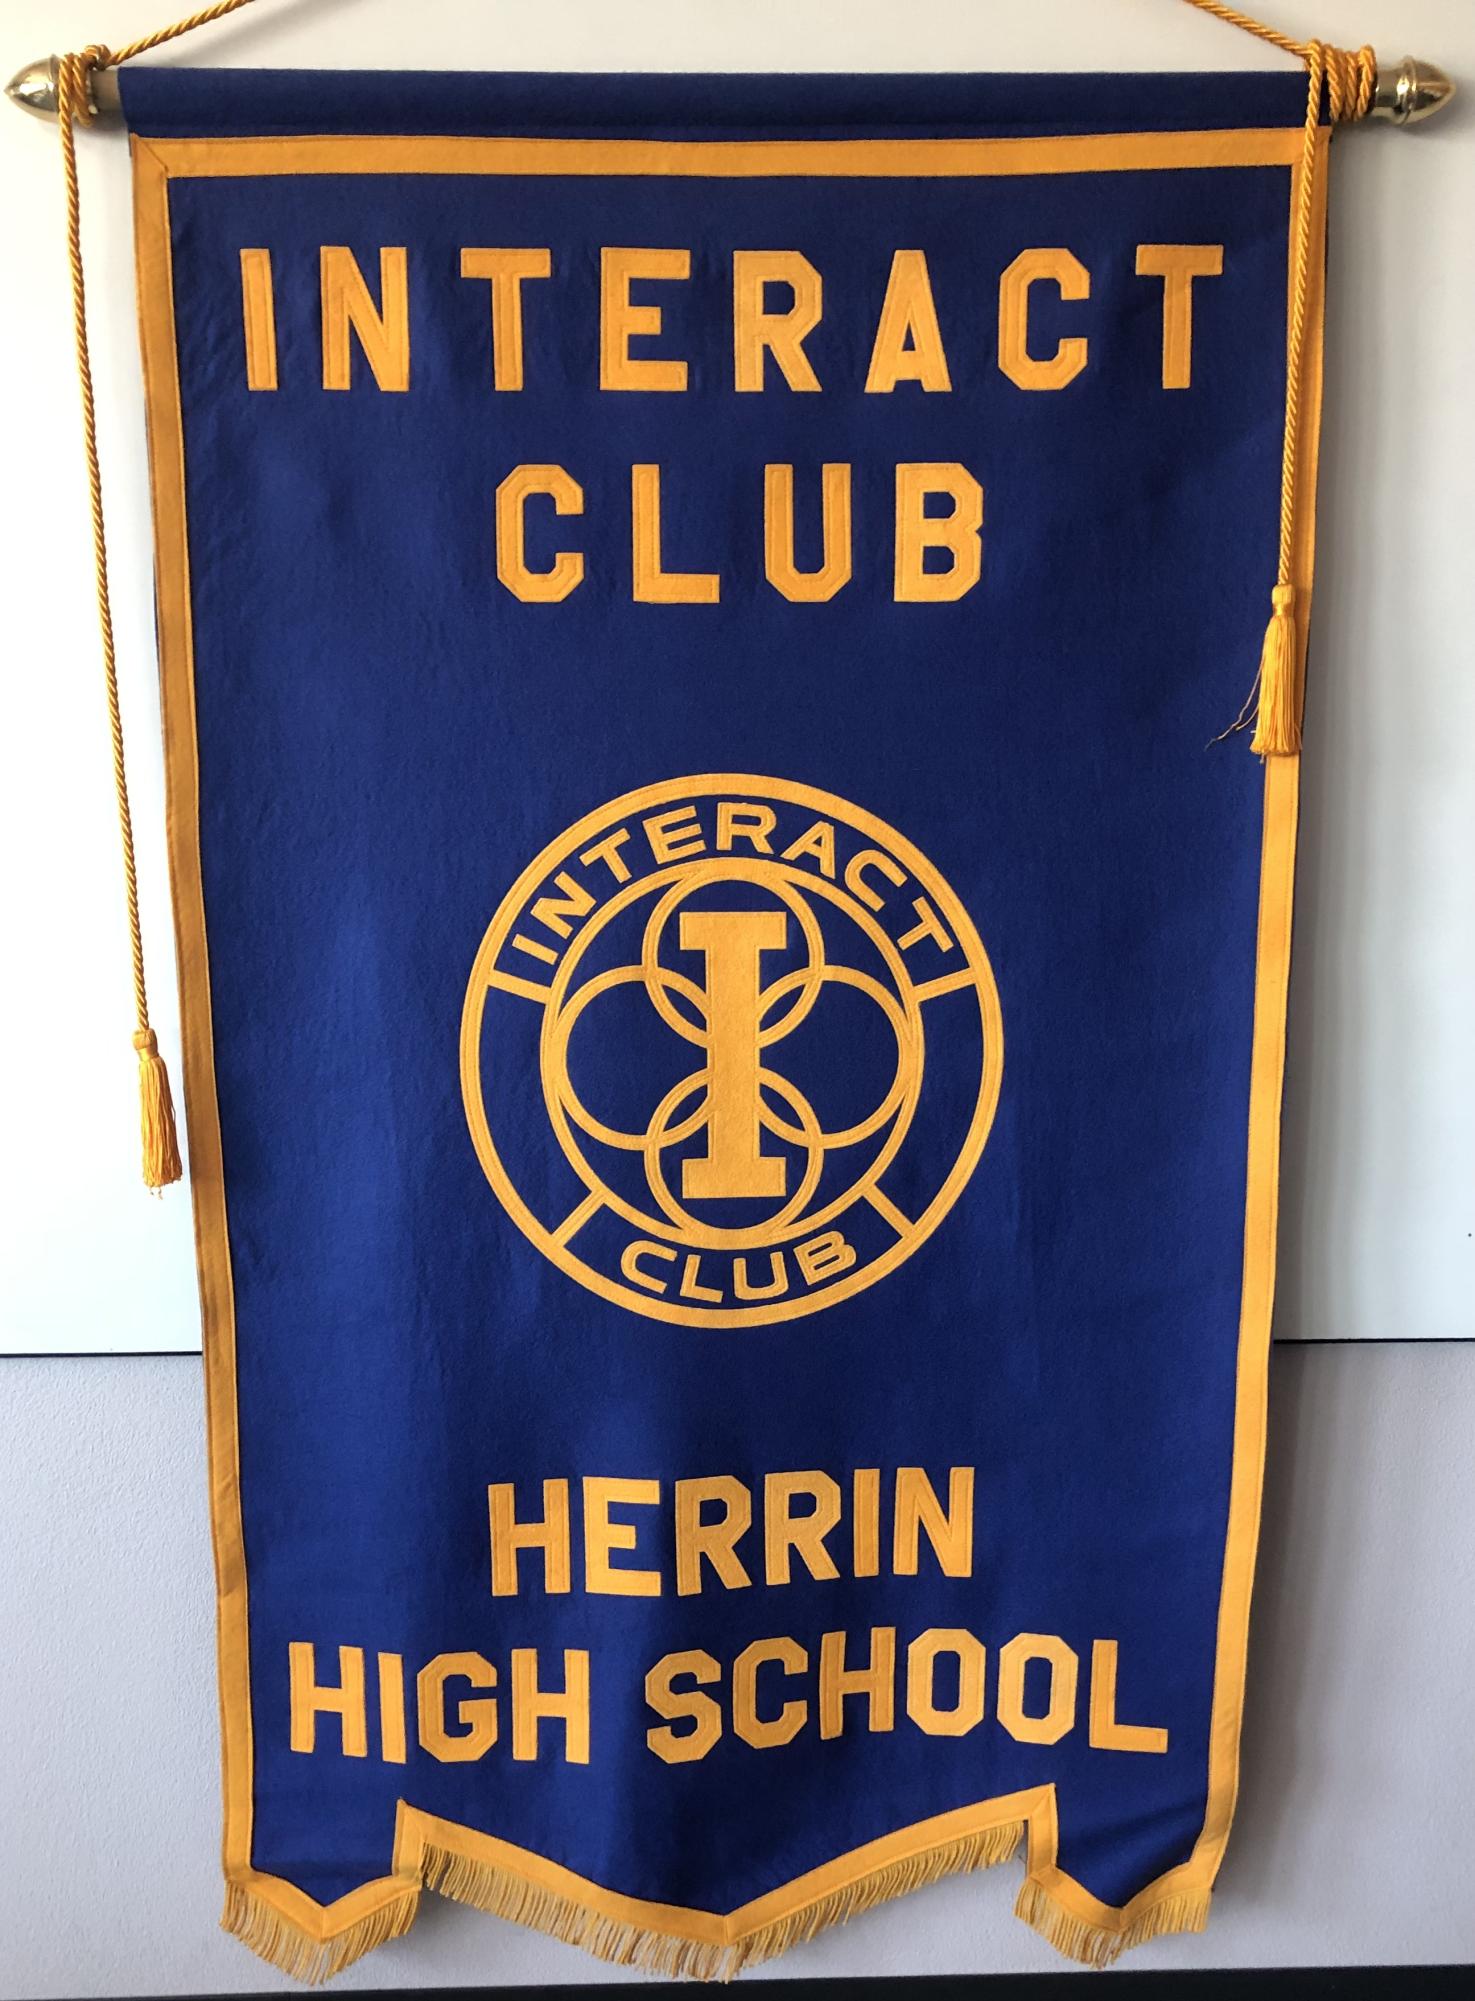 Herrin Interact club is making a difference in the community.